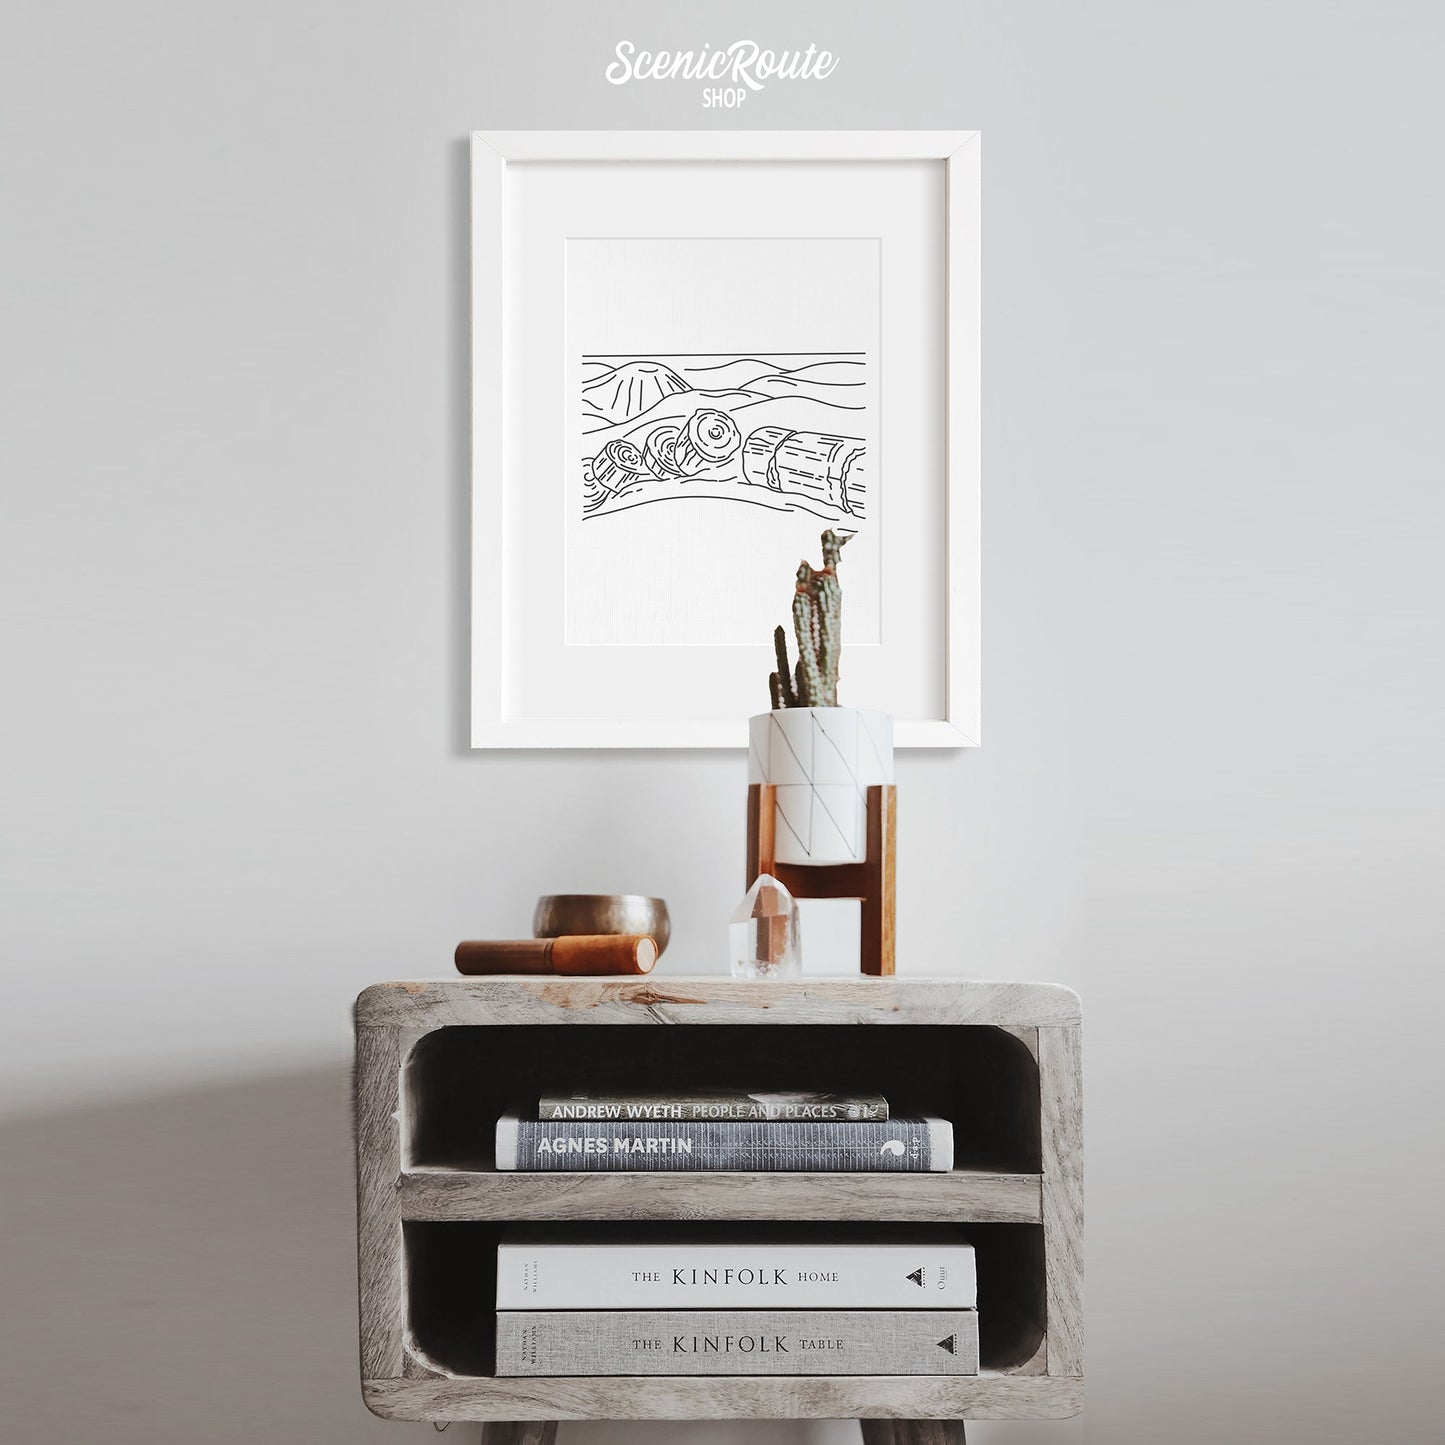 A framed line art drawing of Petrified Forest National Park hanging above a side table with a small potted cactus